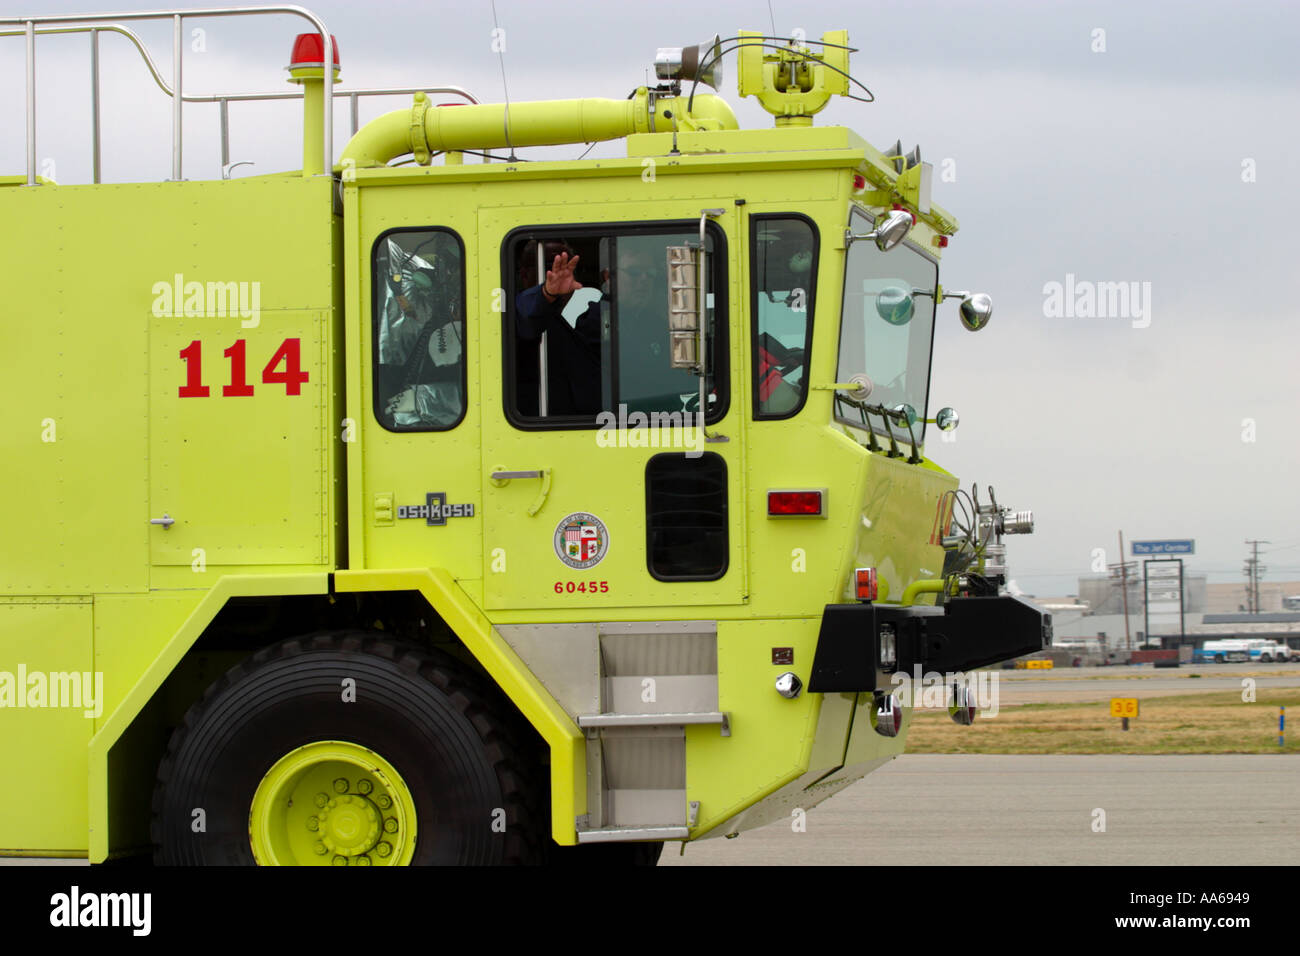 Los Angeles City Fire Department Truck stationed at Van Nuys California Airport Stock Photo